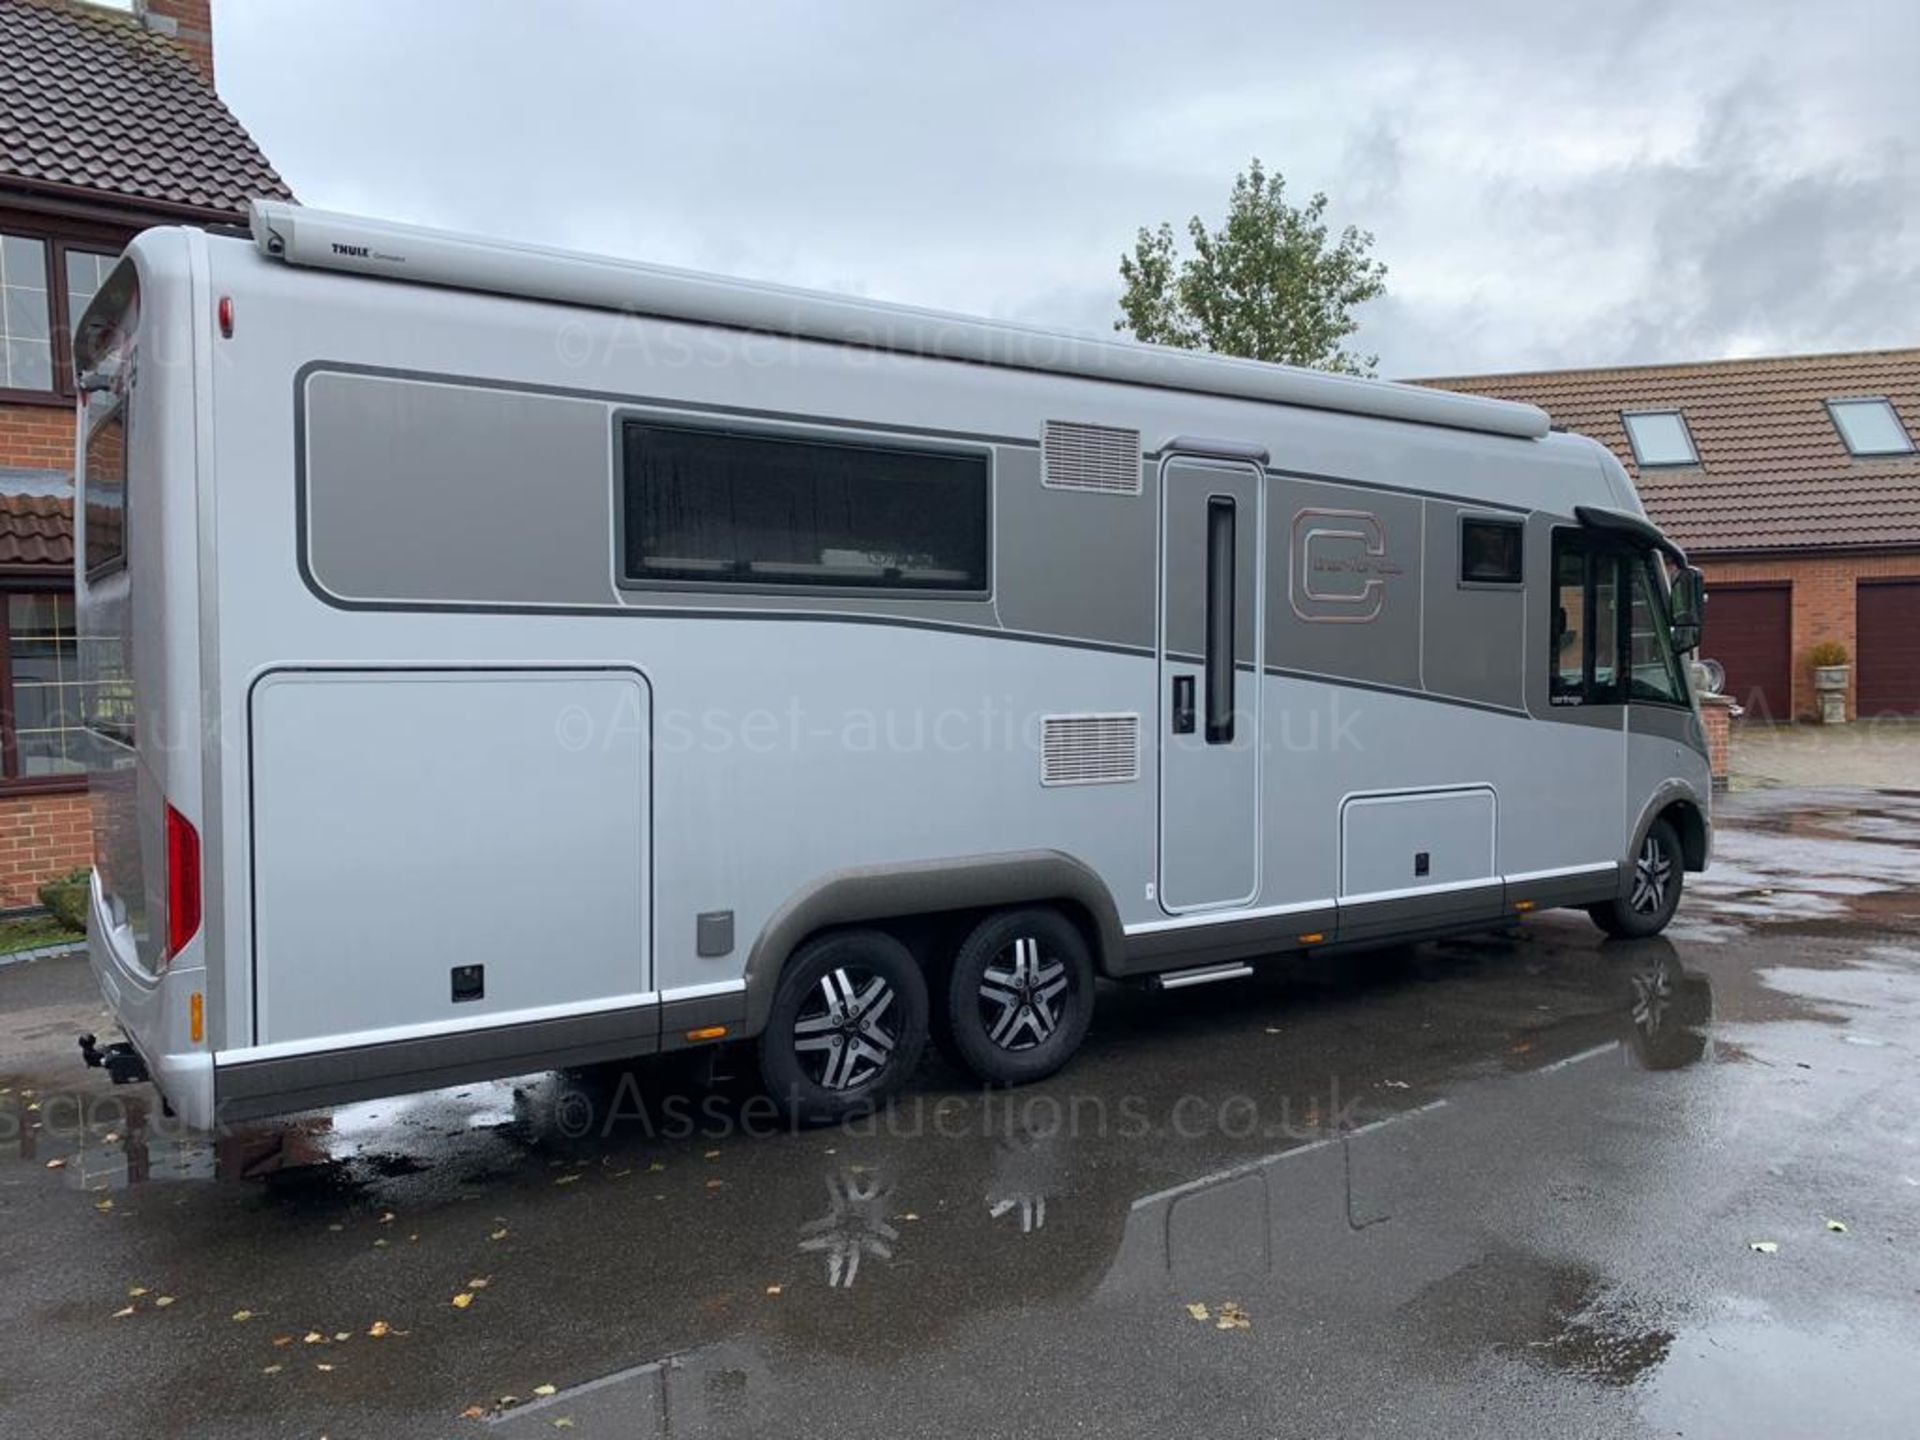 2020 CARTHAGO LINER-FOR-TWO 53L MOTORHOME, SHOWING 4529 MILES, MINT CONDITION *NO VAT* - Image 5 of 33